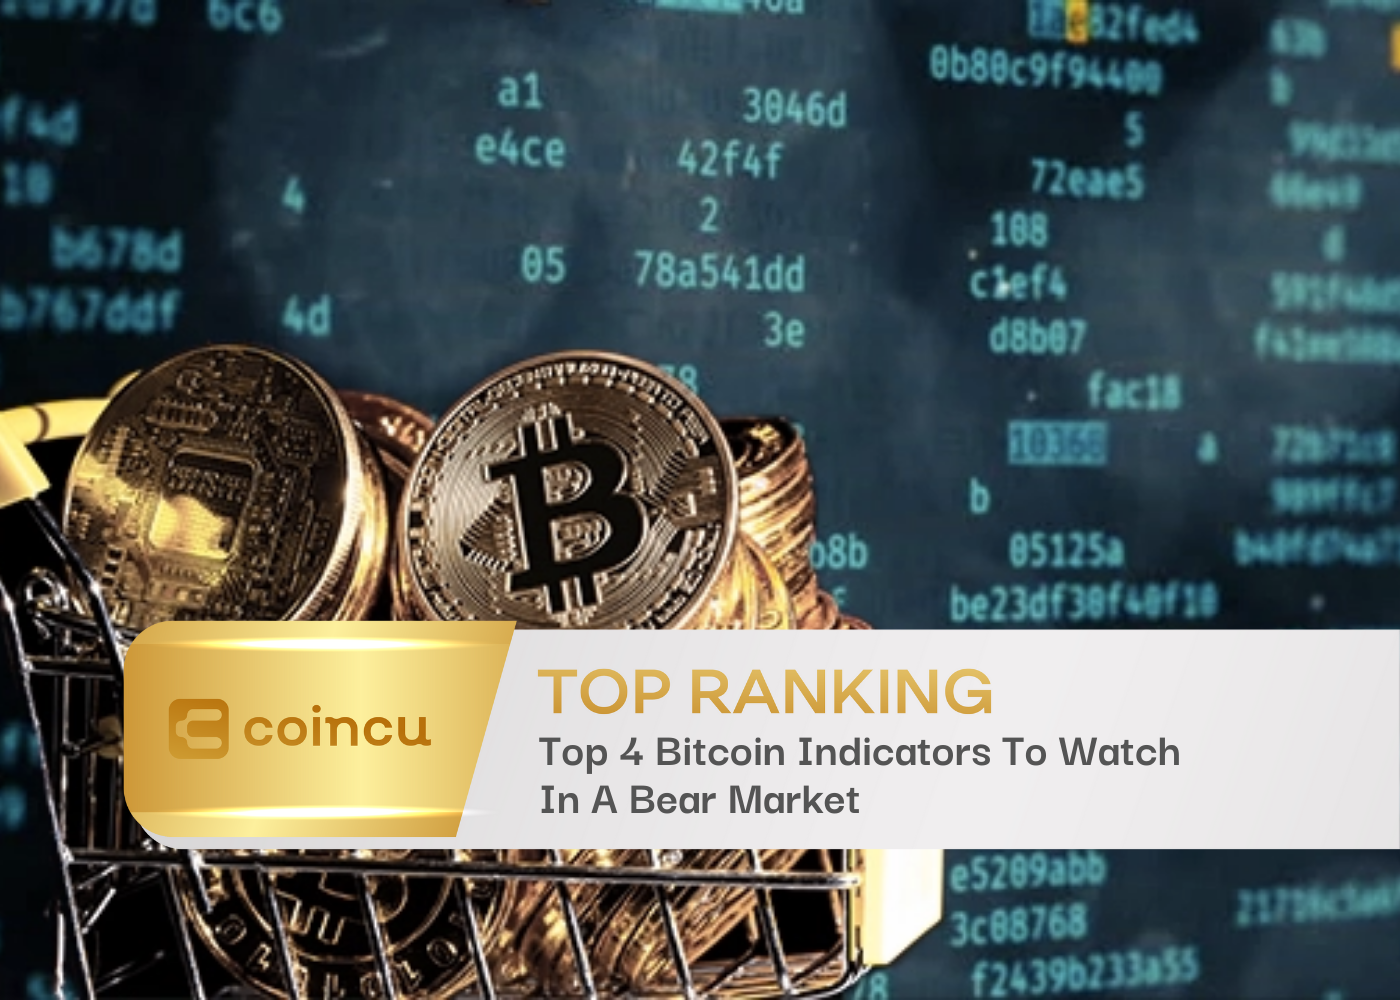 Top 4 Bitcoin Indicators To Watch In A Bear Market